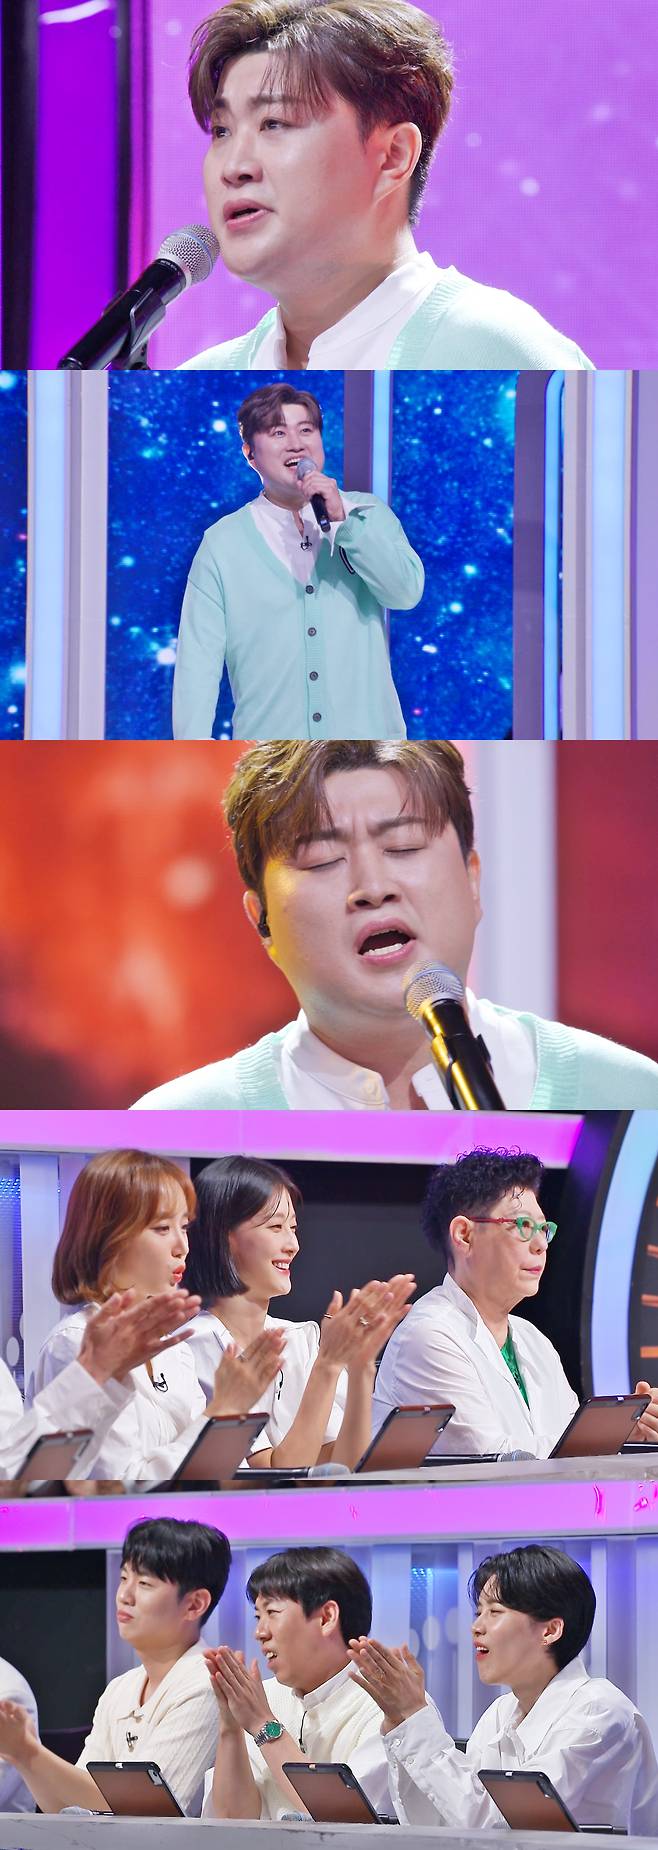 Singer Kim Ho-joong, who recently returned after Call off, will unveil his new song stage.Kim Ho-joong will unveil the new stage for the first time on the SBS mystery music show DNA Singer - Fantastic Family (hereinafter referred to as DNA Singer) on the 28th.Kim Ho-joong will appear on SBS entertainment after a long time since collecting topics from SBS Amazing Competition! Stocking to Godding Pavarotti.Since then, he will release the stage of the new song The Lighting Person, which tells the story of fans who supported him during his military service, for the first time, and will impress not only fans but also many people.Kim Ho-joong also said, There was a stage where I saw a big DNA singer at the time of military service.I want to sing it on this stage with that heart. In addition to the new song, I foresaw another special stage.Especially, the judges and audiences who saw Kim Ho-joongs stage for a long time were fascinated by the stormy intensity that overwhelmed the scene and his unique sensibility.Kim Ho-joongs new song stage, which will be released for the first time on the air, can be found at the DNA Singer broadcasted at 9 pm on the 28th.